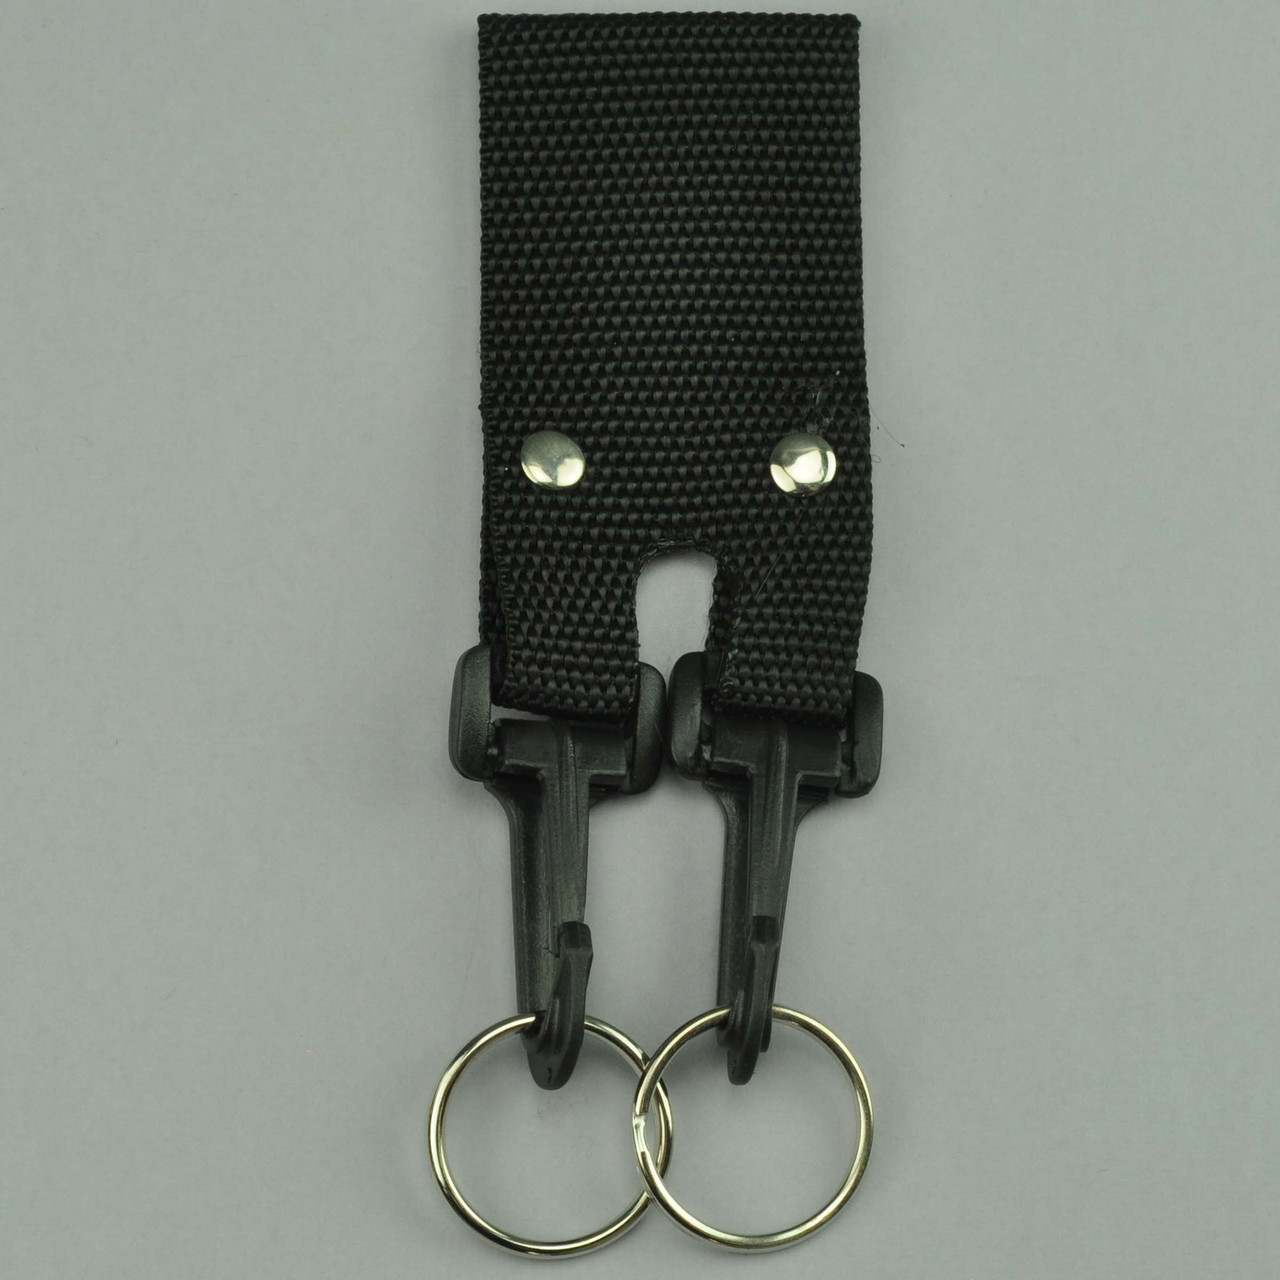 Shop for and Buy Nylon Belt Key Holder Double Hooks at . Large  selection and bulk discounts available.